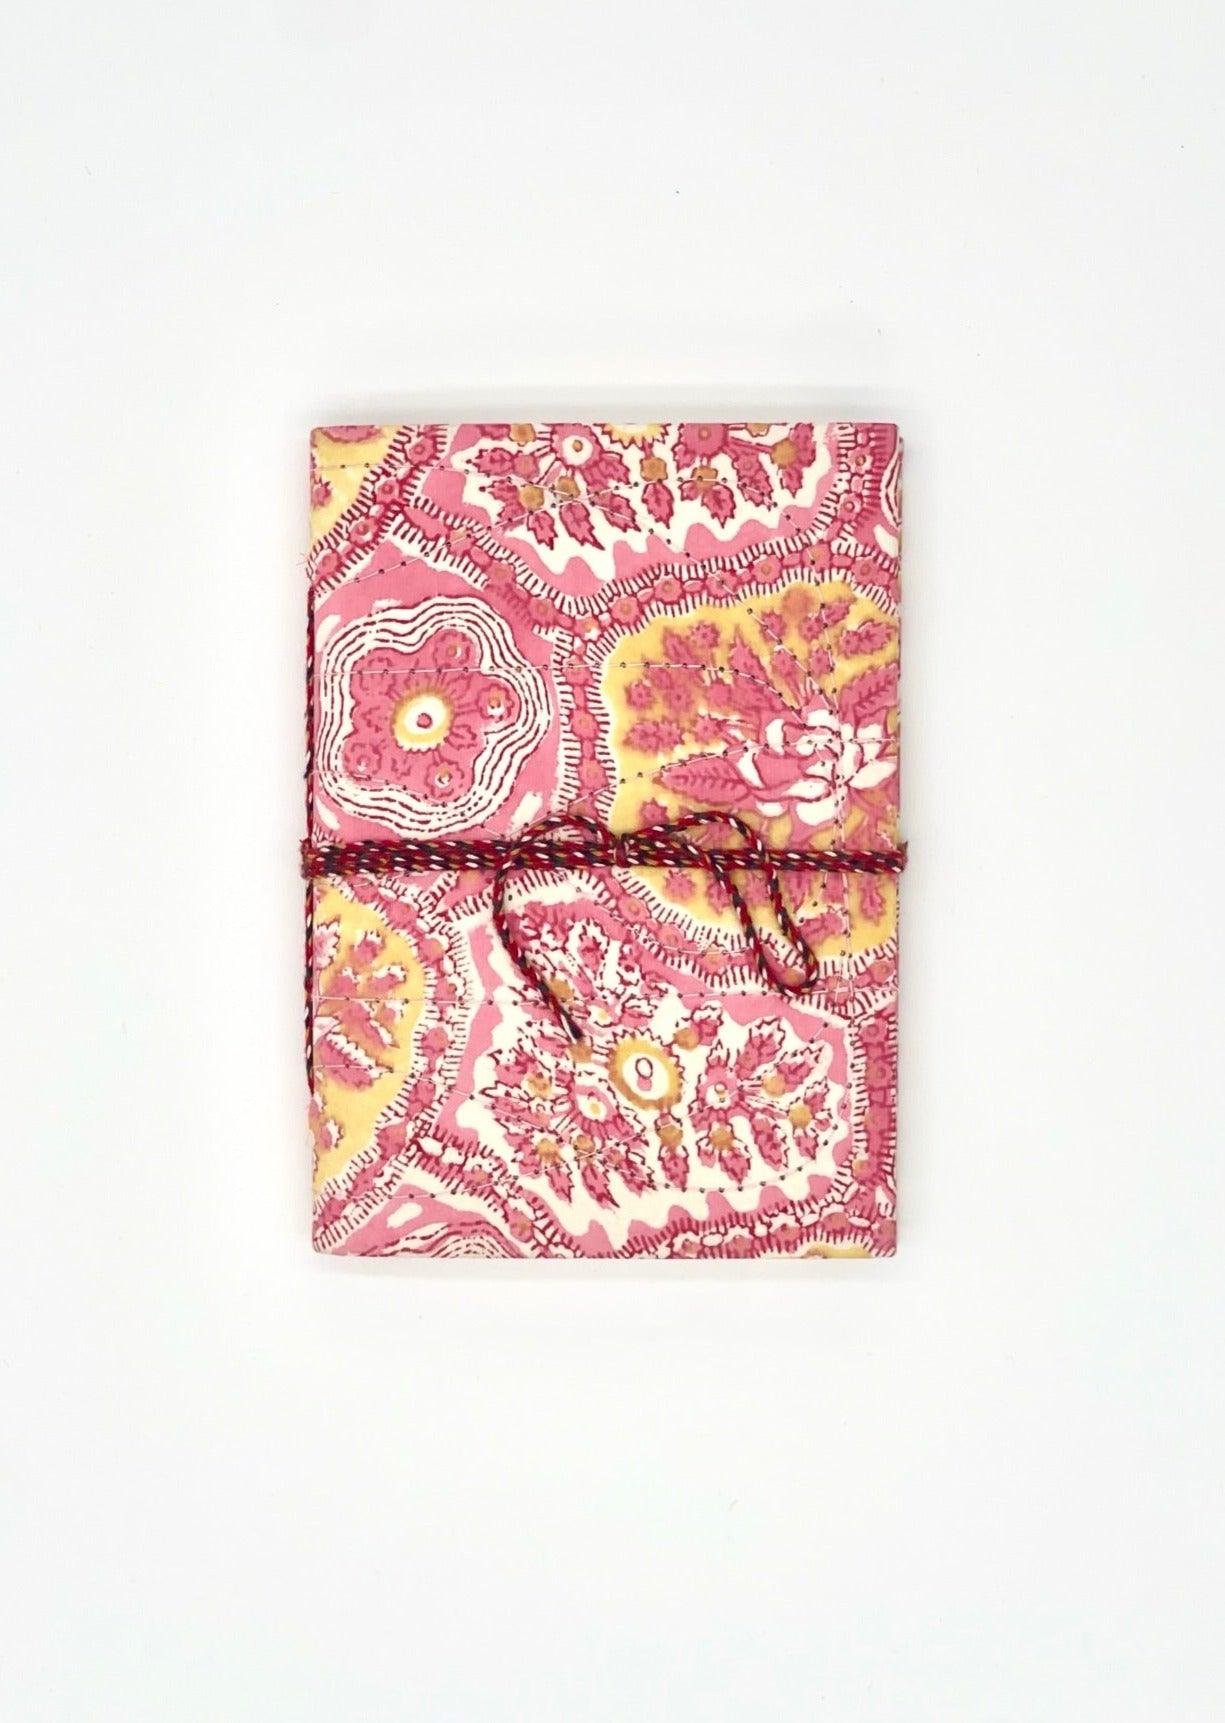 Block Print Journal/Notebook, Pink & Yellow Floral - Unlined, 100 Pages, Thick Paper, Hard Cover - Transcend